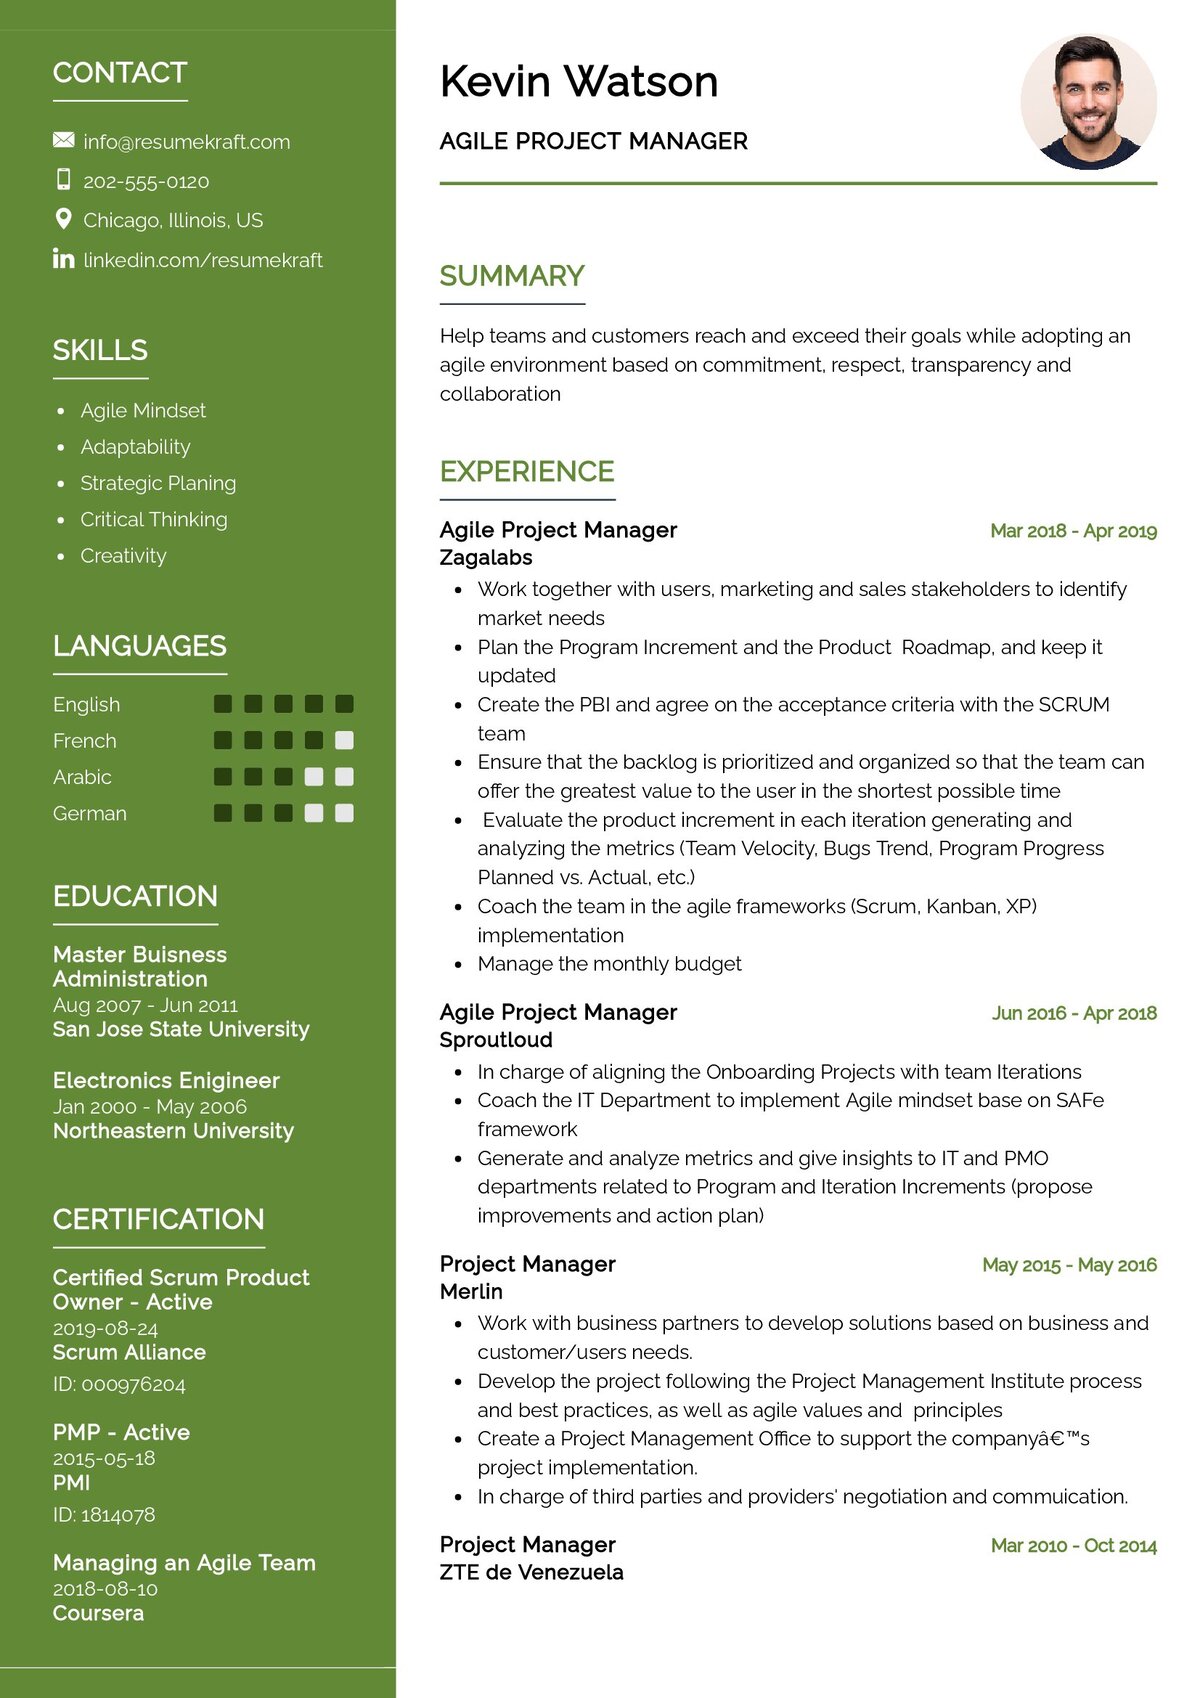 agile project manager resume